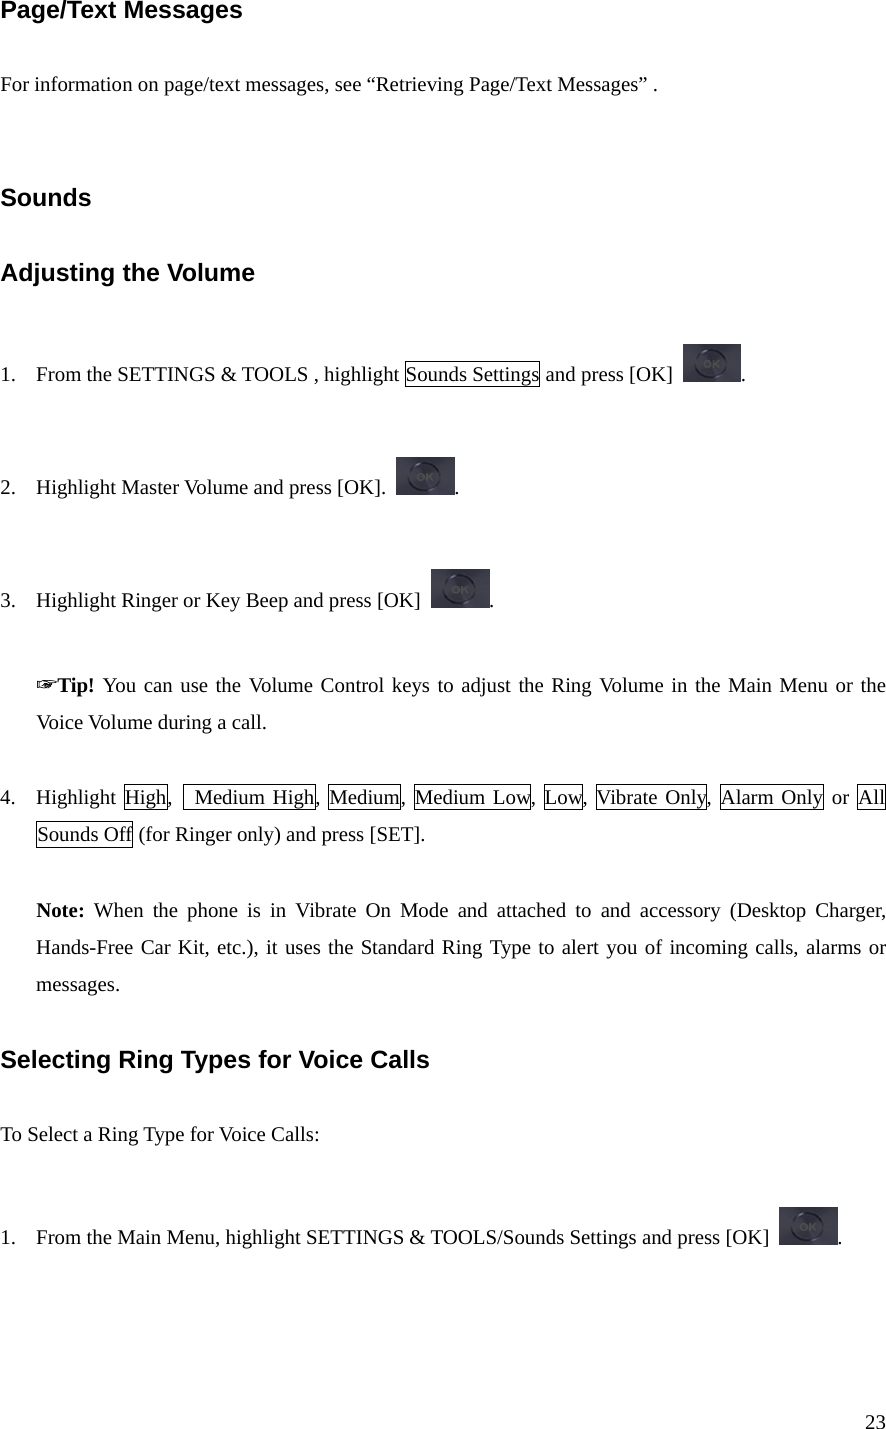 23 Page/Text Messages  For information on page/text messages, see “Retrieving Page/Text Messages” .   Sounds  Adjusting the Volume  1. From the SETTINGS &amp; TOOLS , highlight Sounds Settings and press [OK]  .  2. Highlight Master Volume and press [OK].  .  3. Highlight Ringer or Key Beep and press [OK]  .  ☞Tip! You can use the Volume Control keys to adjust the Ring Volume in the Main Menu or the Voice Volume during a call.  4. Highlight High,  Medium High, Medium, Medium Low, Low, Vibrate Only, Alarm Only or All  Sounds Off (for Ringer only) and press [SET].  Note: When the phone is in Vibrate On Mode and attached to and accessory (Desktop Charger, Hands-Free Car Kit, etc.), it uses the Standard Ring Type to alert you of incoming calls, alarms or messages.  Selecting Ring Types for Voice Calls  To Select a Ring Type for Voice Calls:  1. From the Main Menu, highlight SETTINGS &amp; TOOLS/Sounds Settings and press [OK]  .  